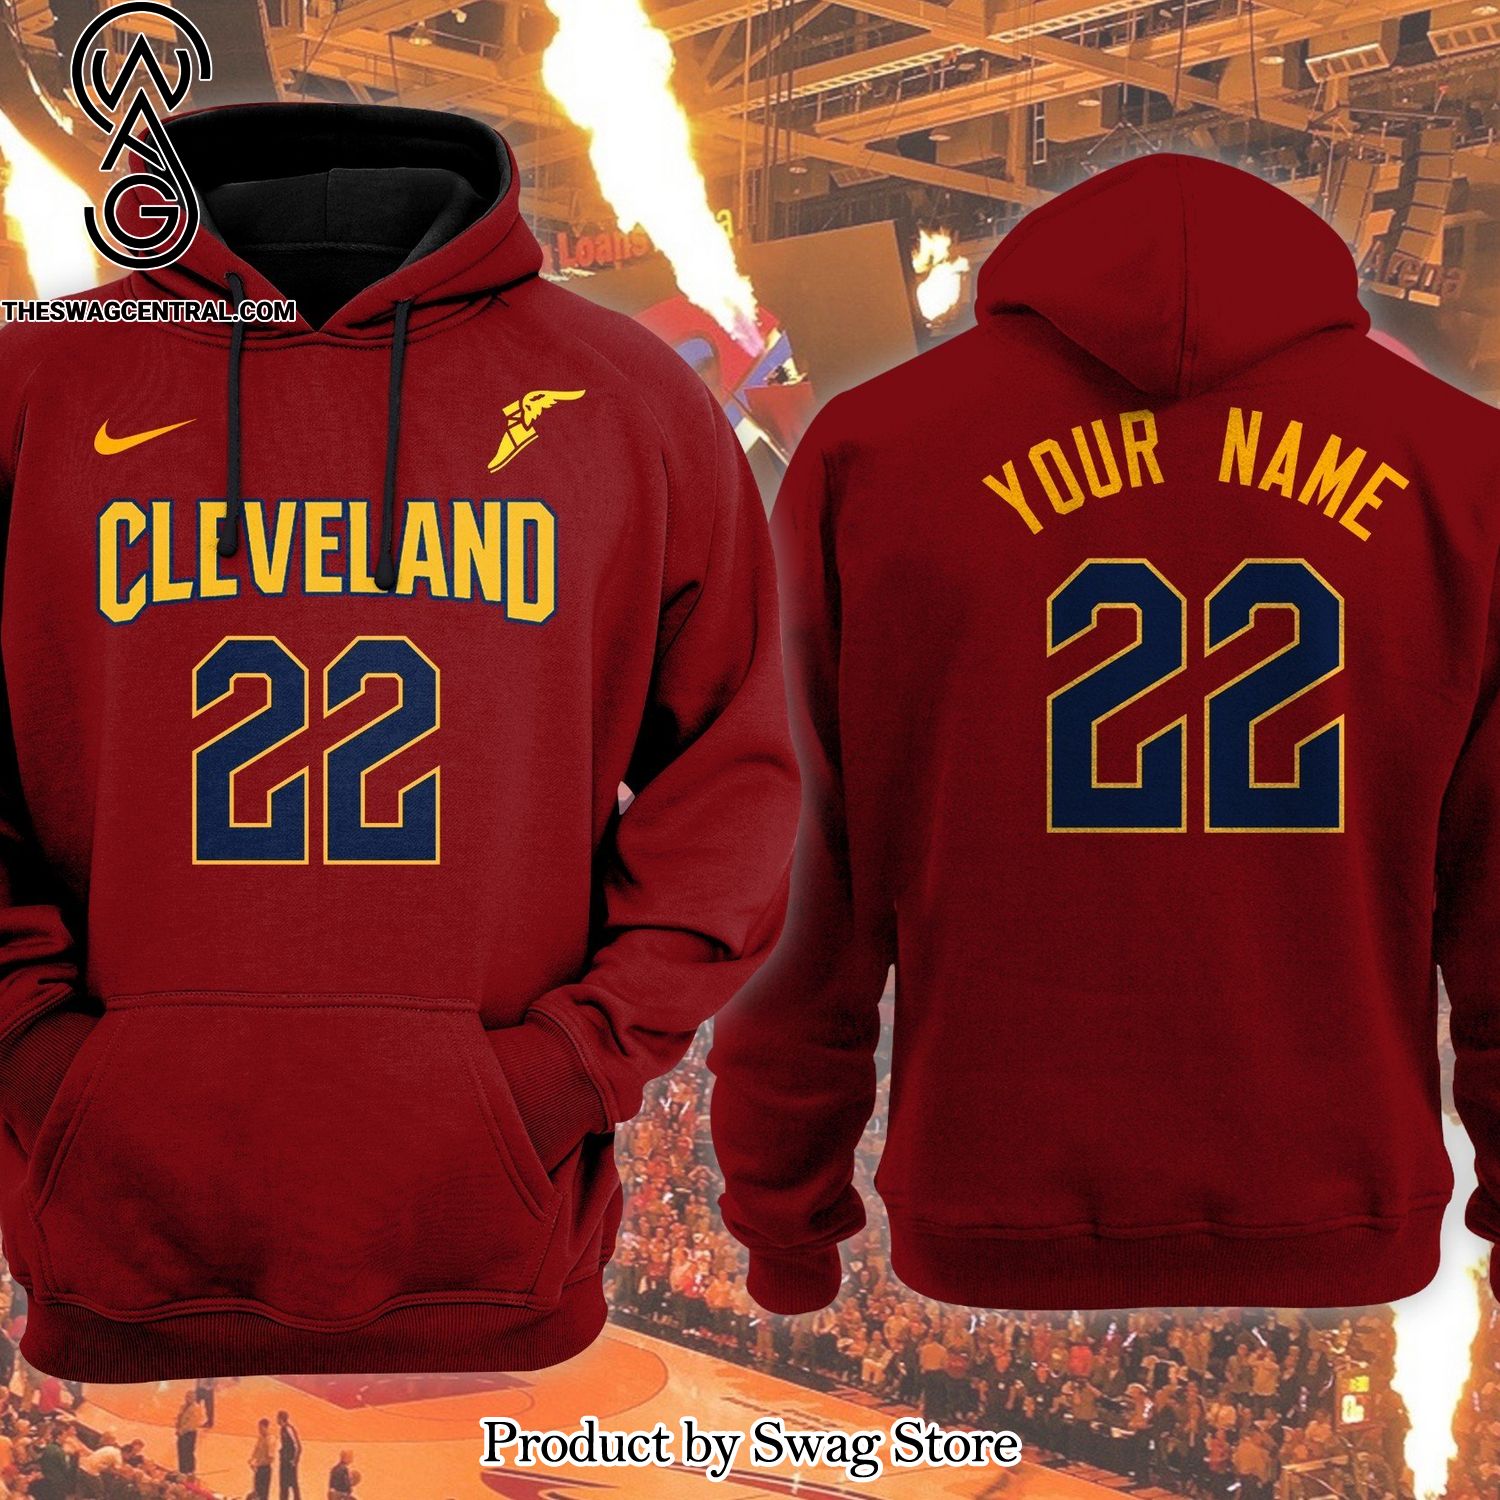 Cleveland Cavaliers NBA Team Awesome Outfit Shirt